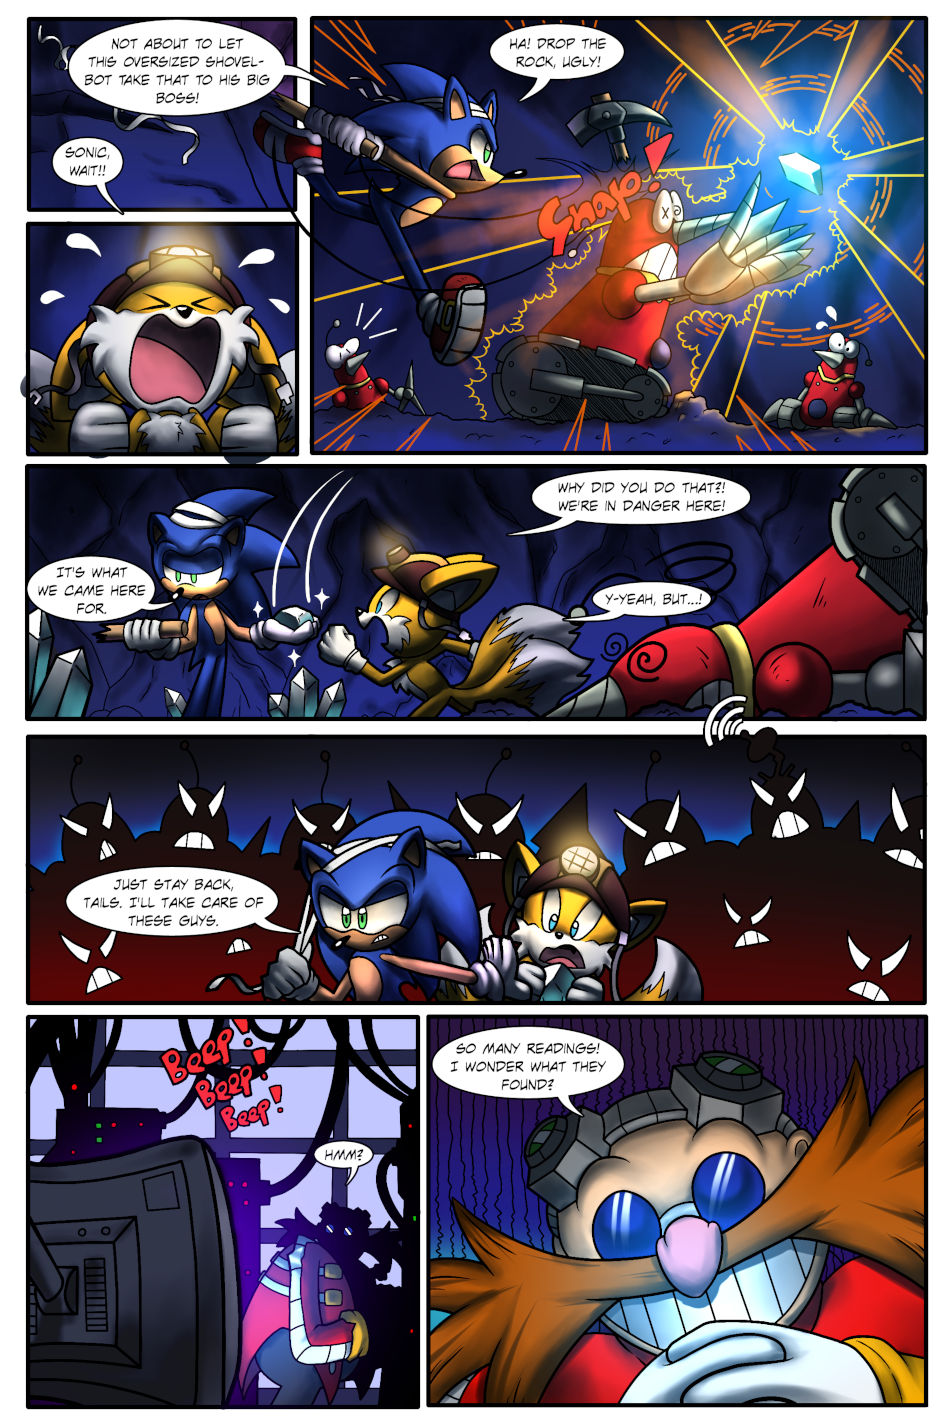 Sonic Legacy Issue 10, Sonic Legacy Wiki